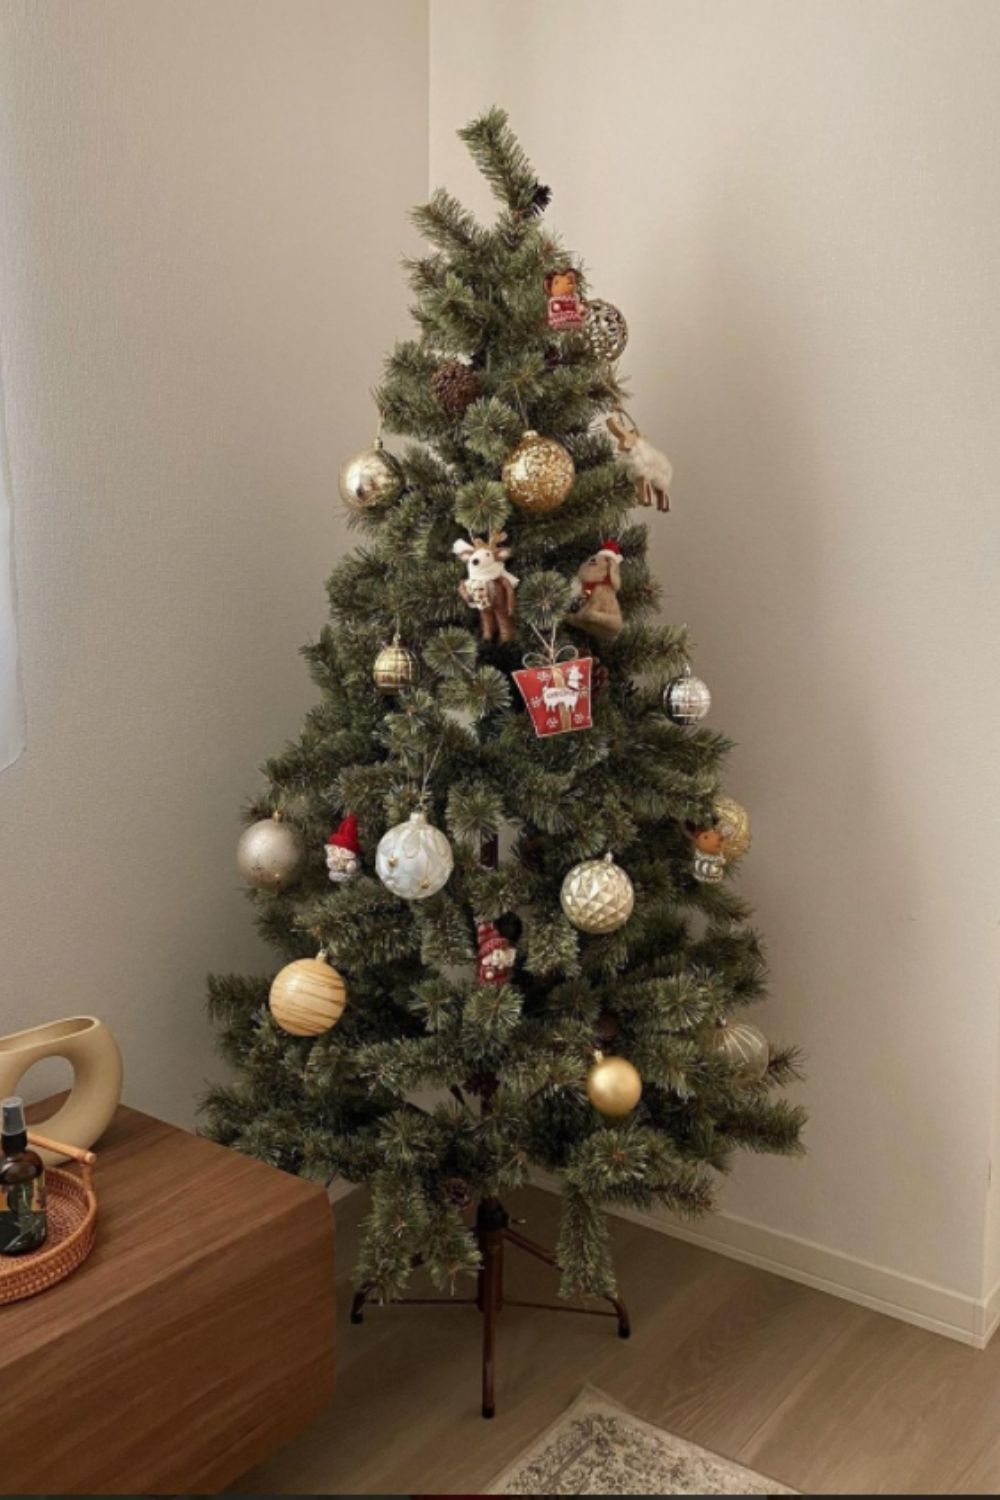 A Christmas tree hung with presents